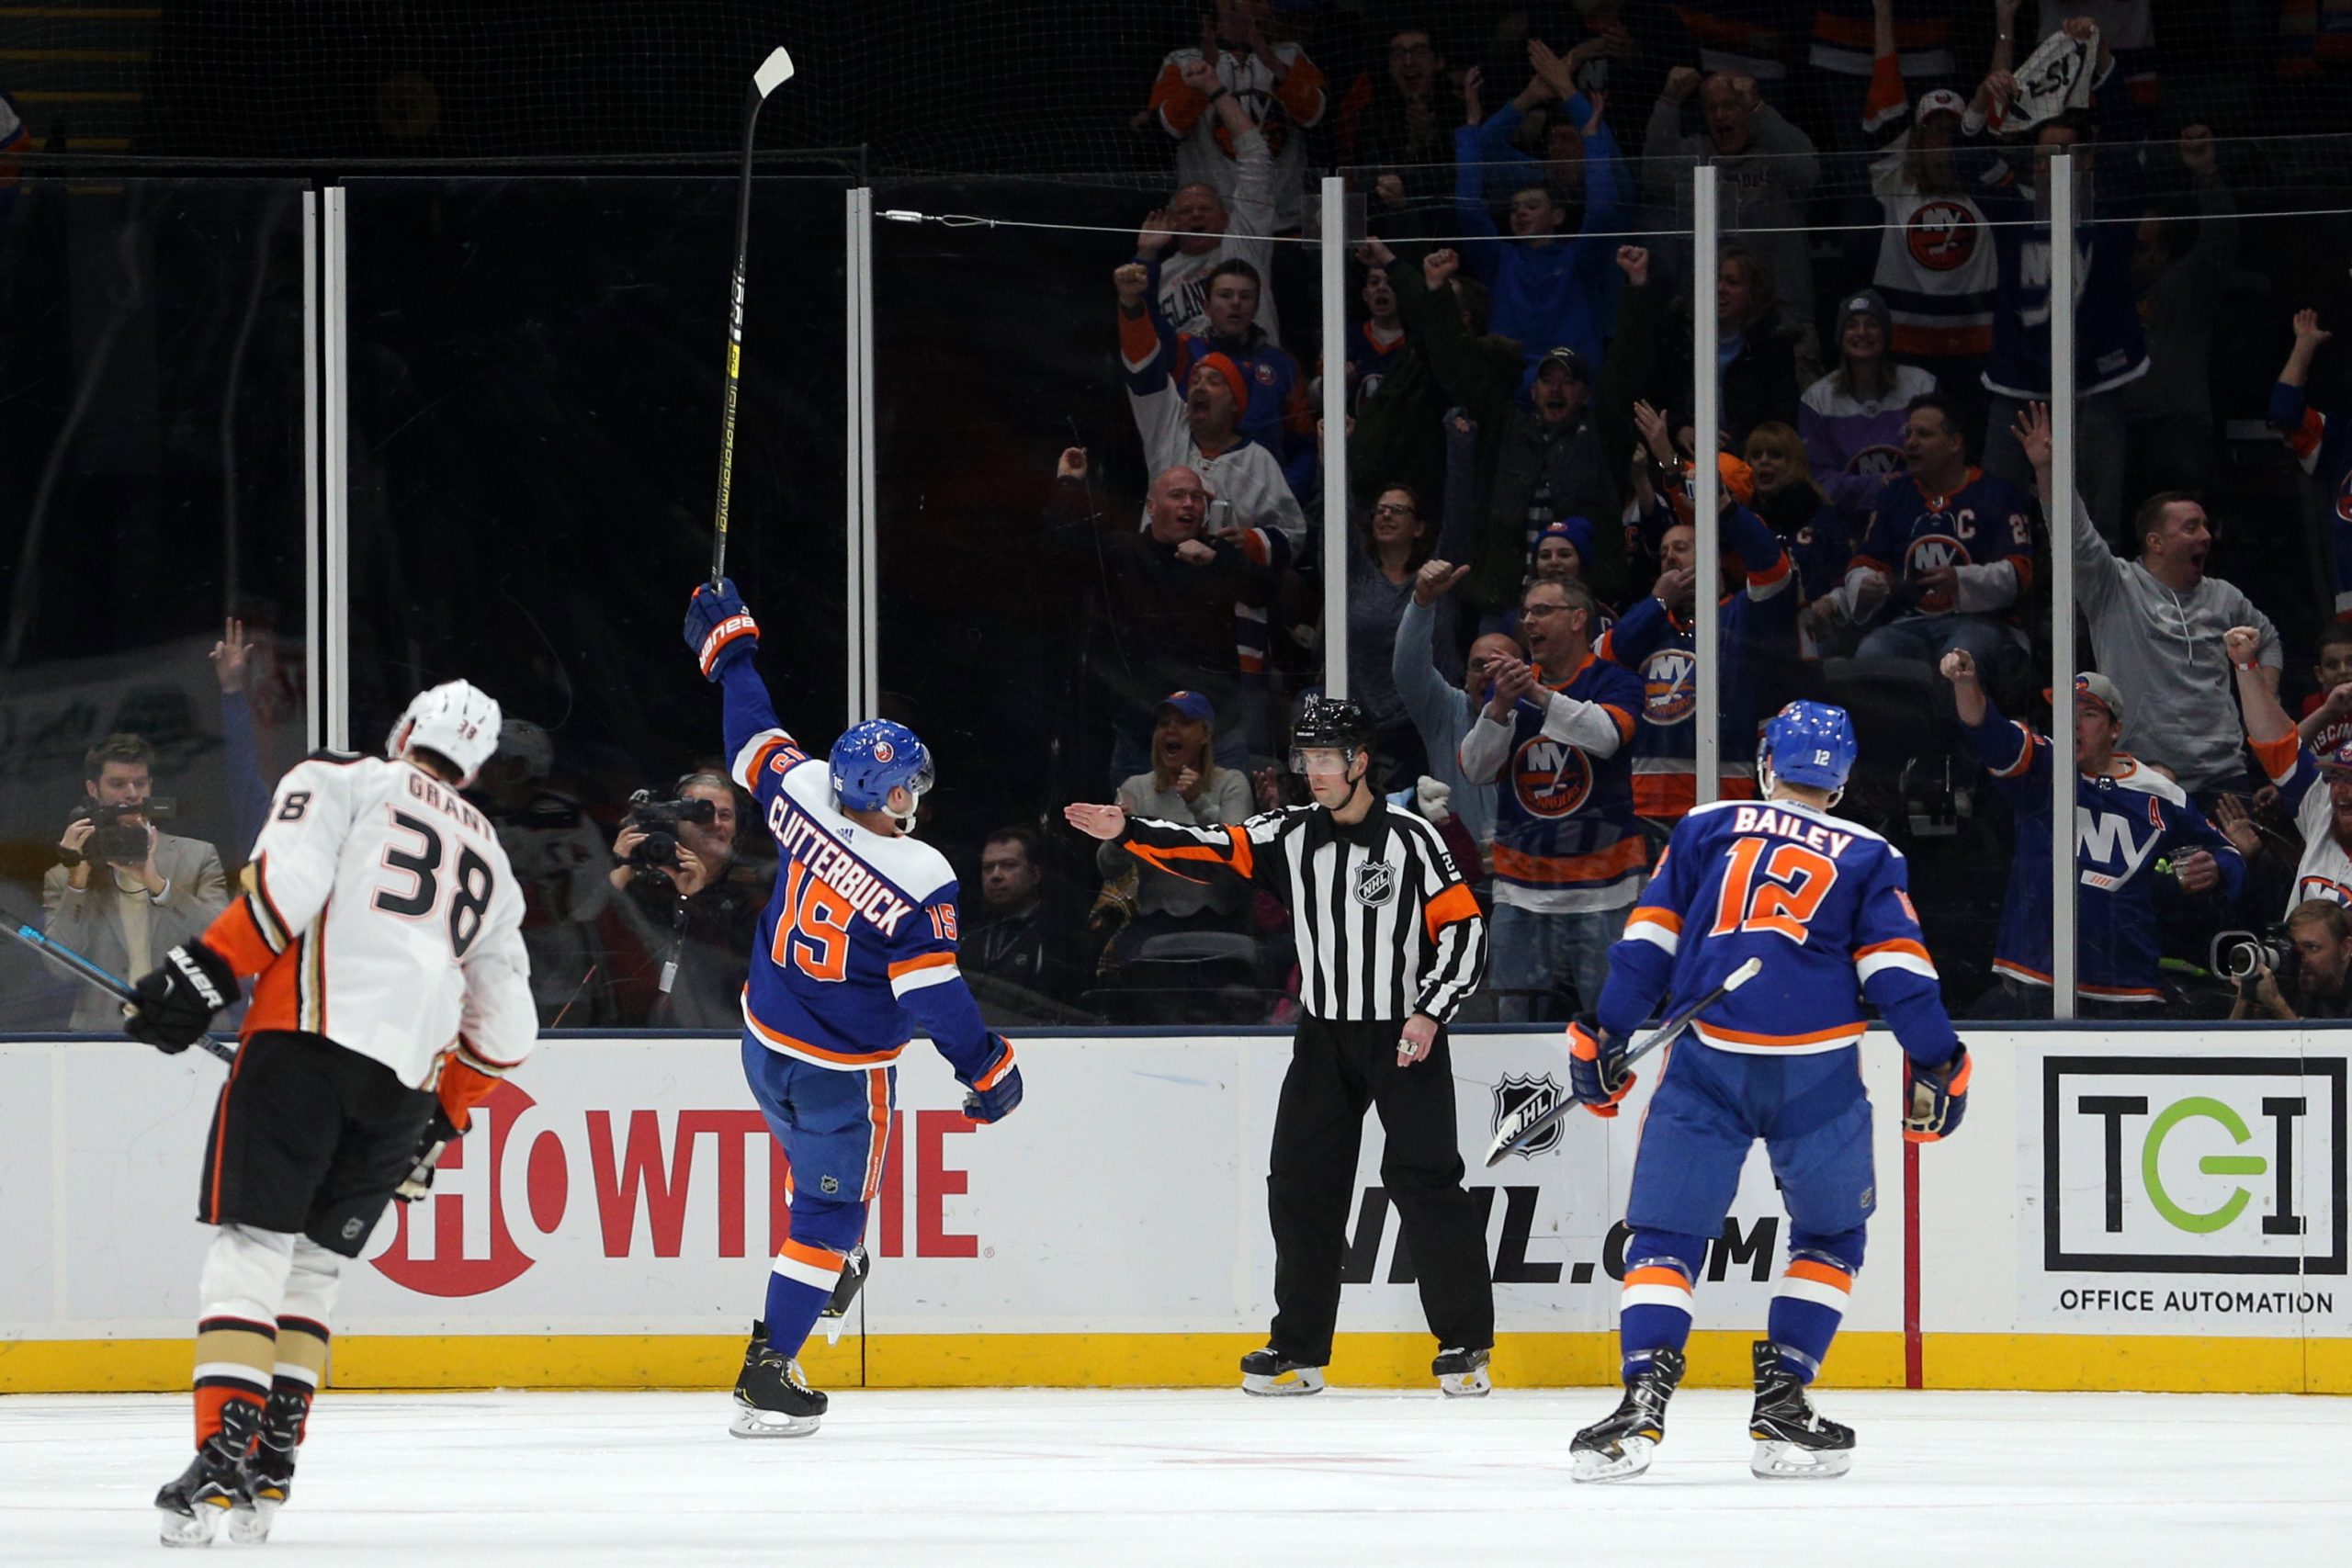 Jan 20, 2019; Uniondale, NY, USA; New York Islanders right wing Cal Clutterbuck (15) celebrates one of his two first period goals against the Anaheim Ducks during the first period at Nassau Veterans Memorial Coliseum. Mandatory Credit: Brad Penner-USA TODAY Sports